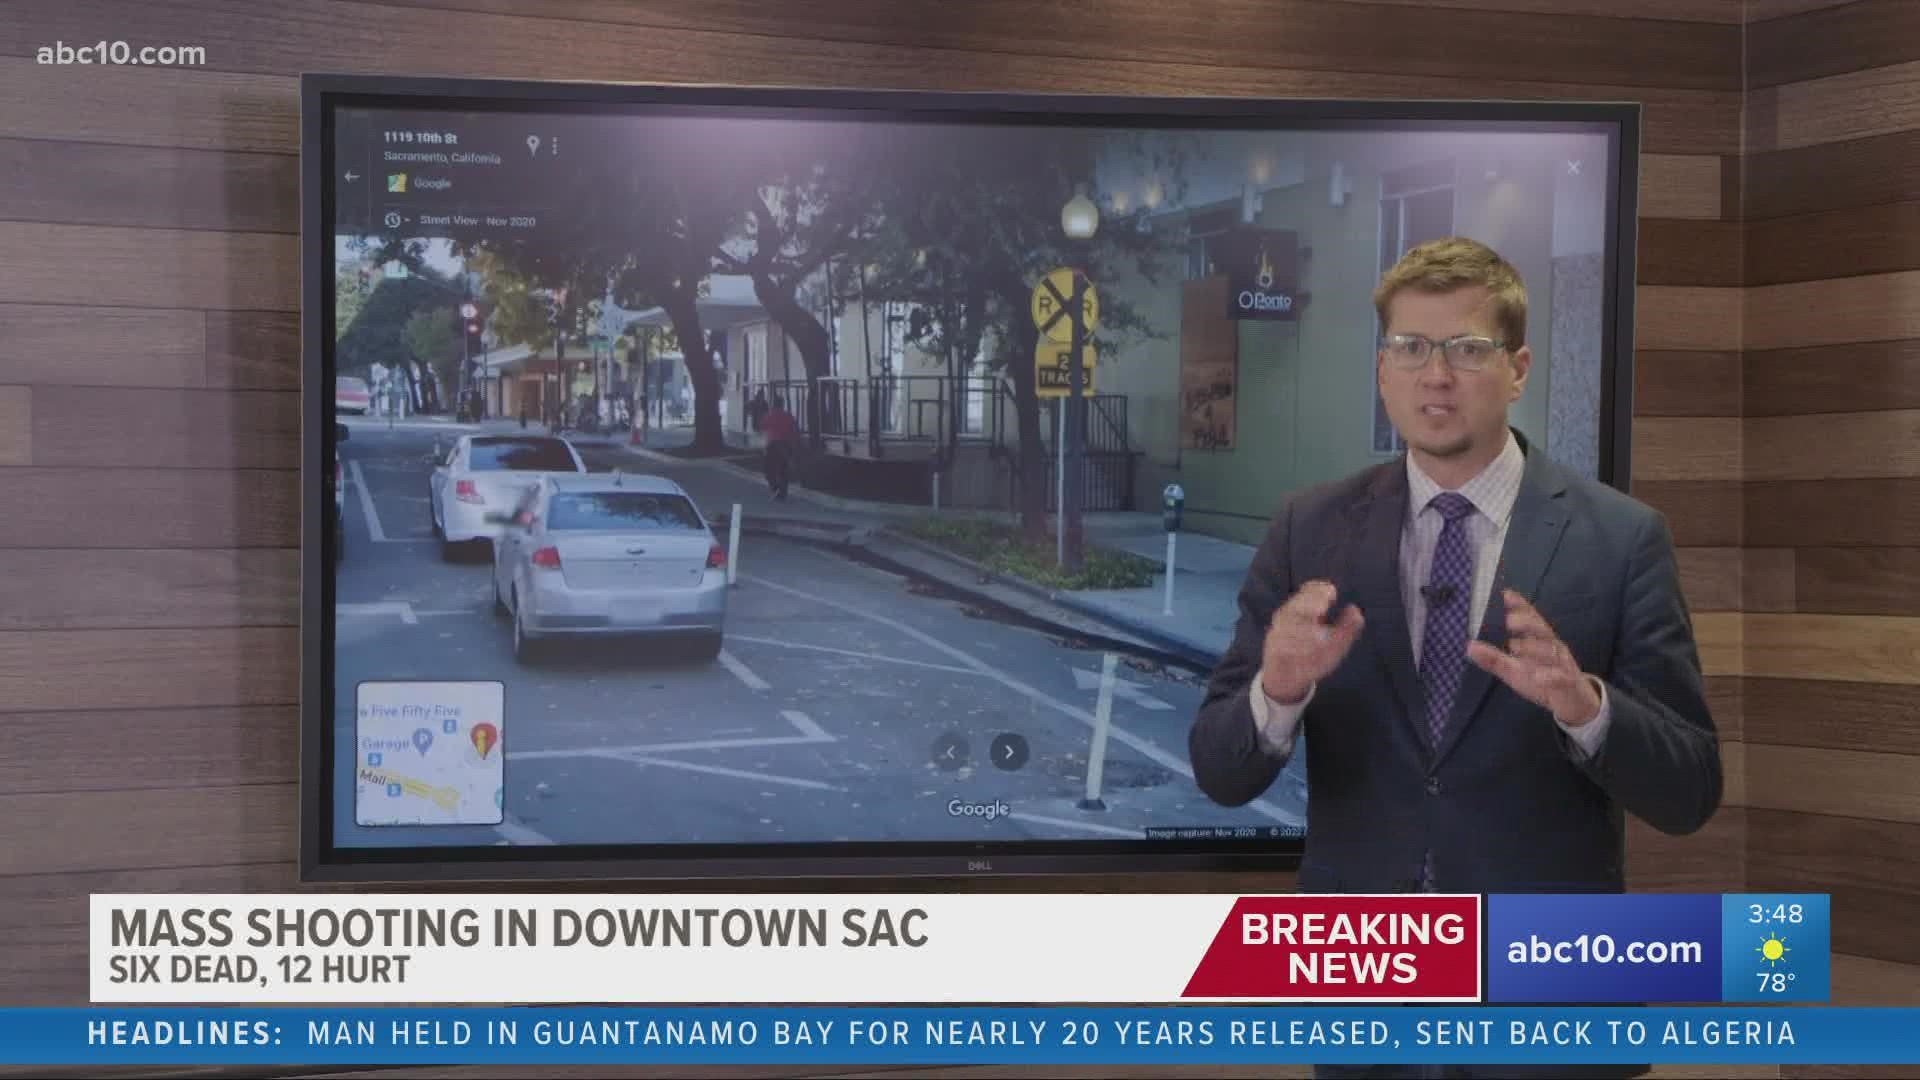 ABC10's Brandon Rittiman walks through the timeline of events during Sunday morning's shooting in downtown Sacramento.